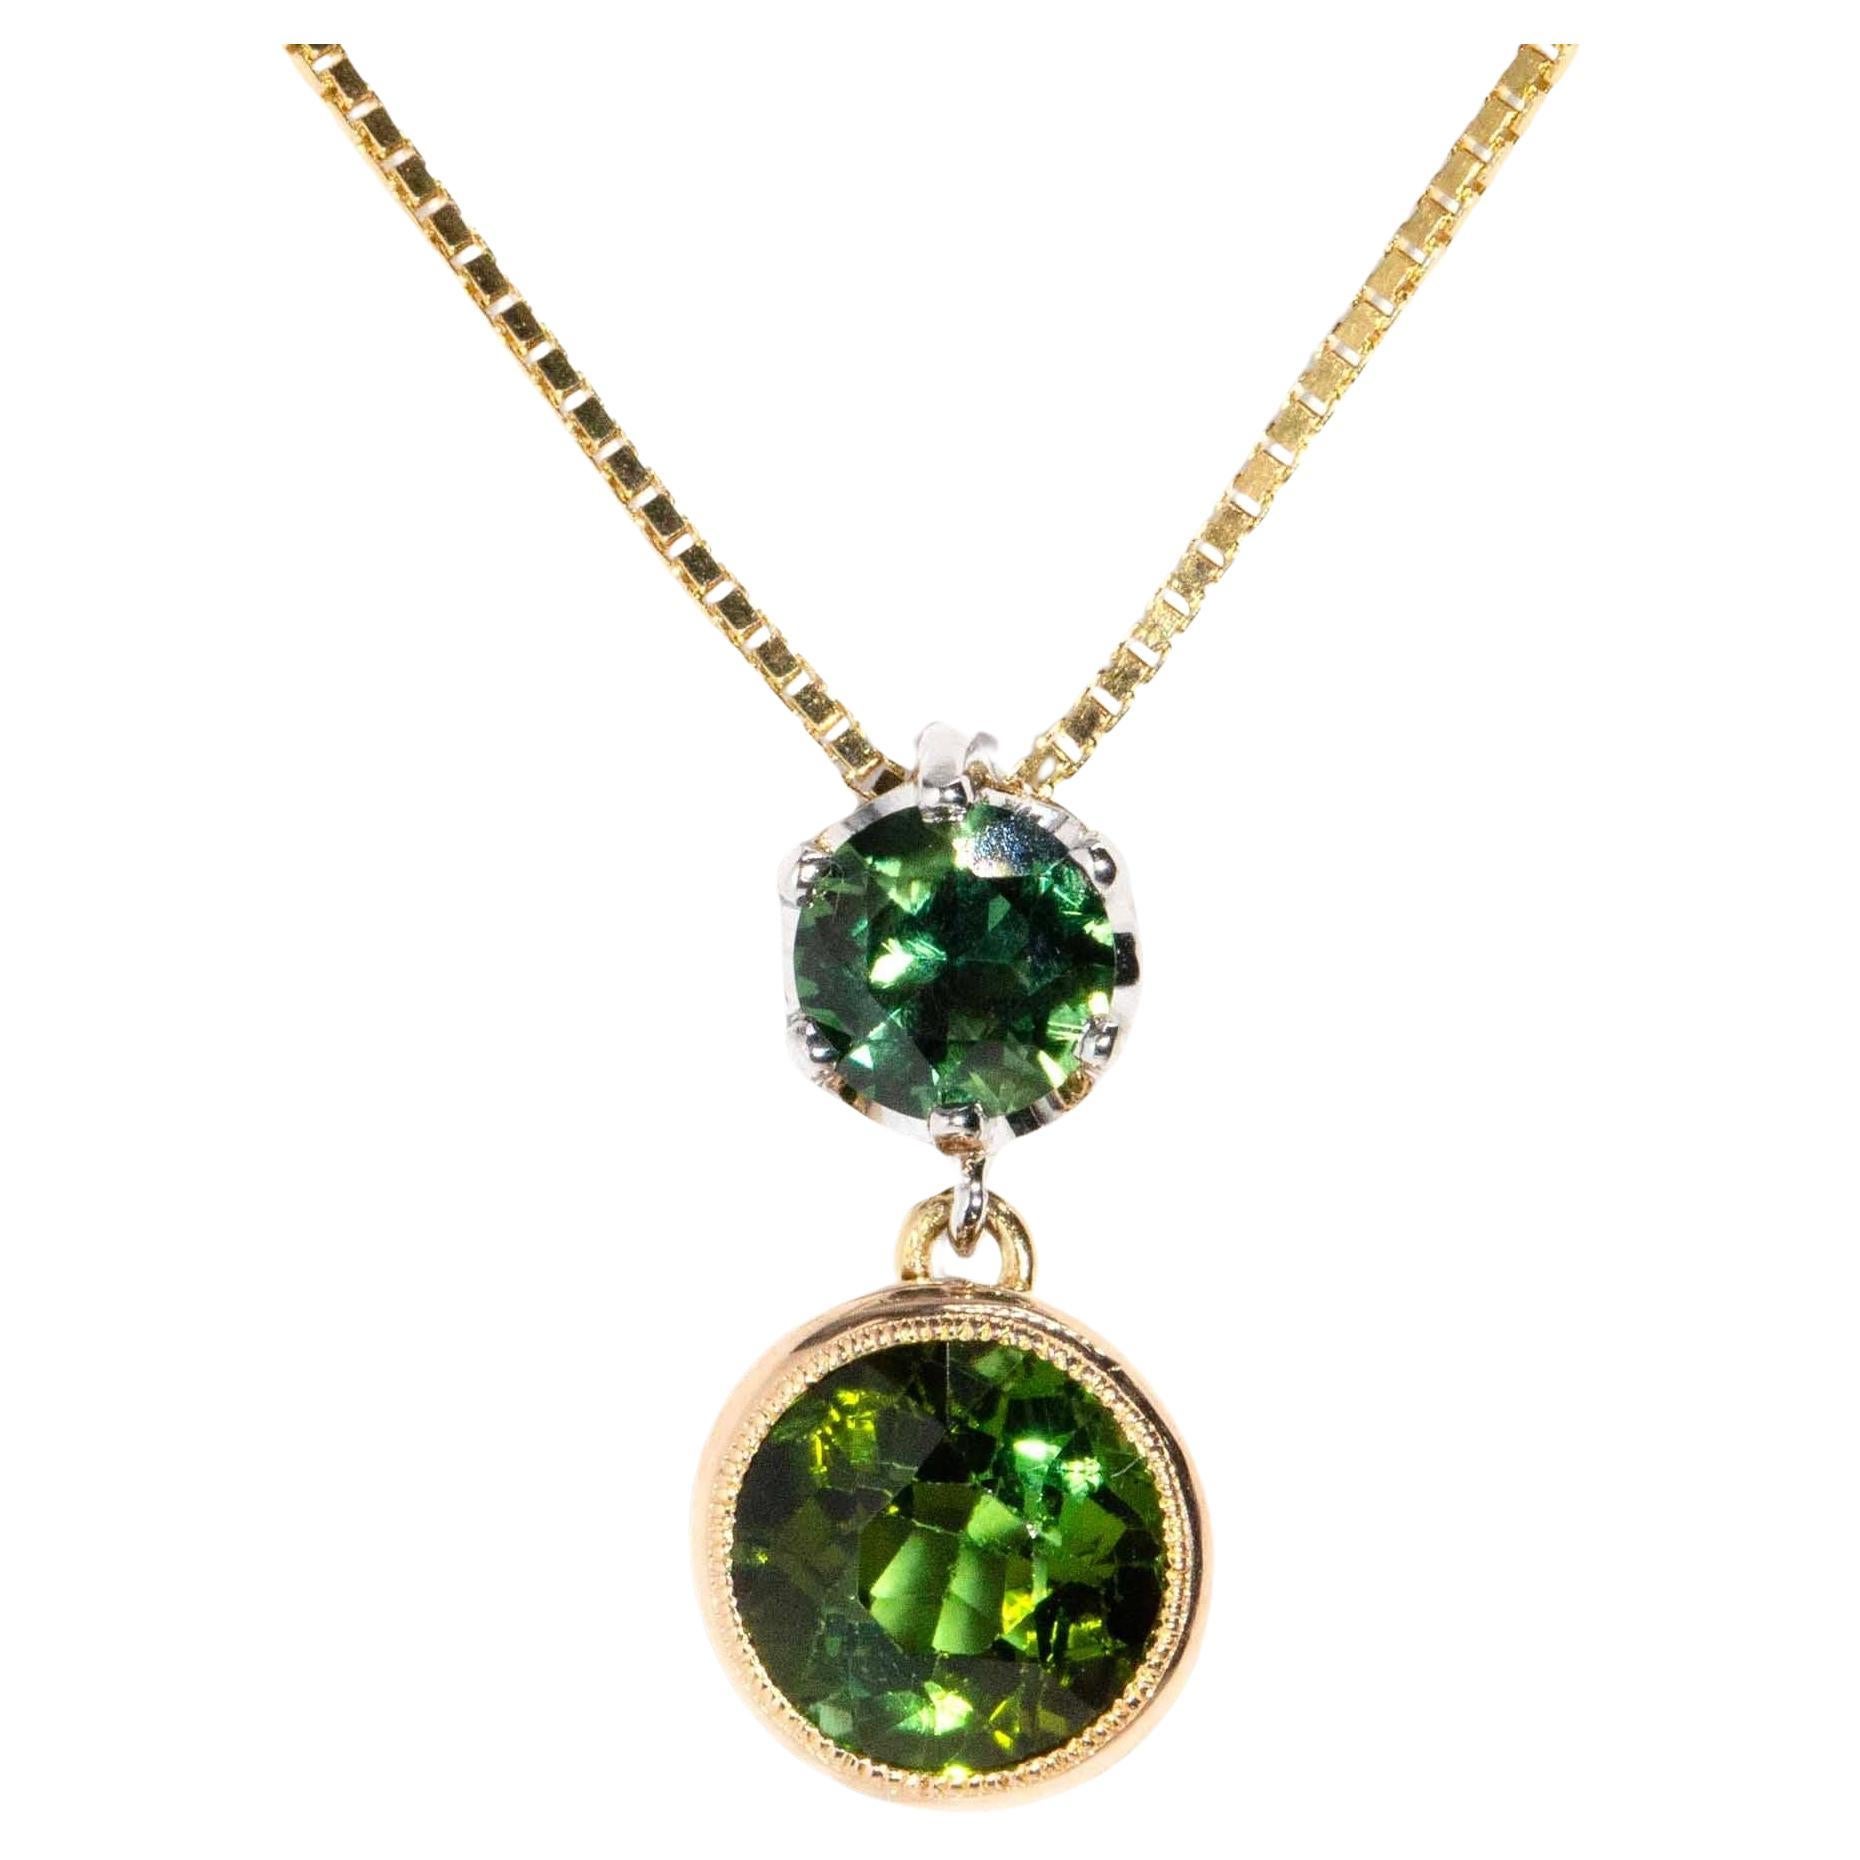 Reinvented Vintage Deep Green Sapphire Pendant 15 & 18 Carat with Chain